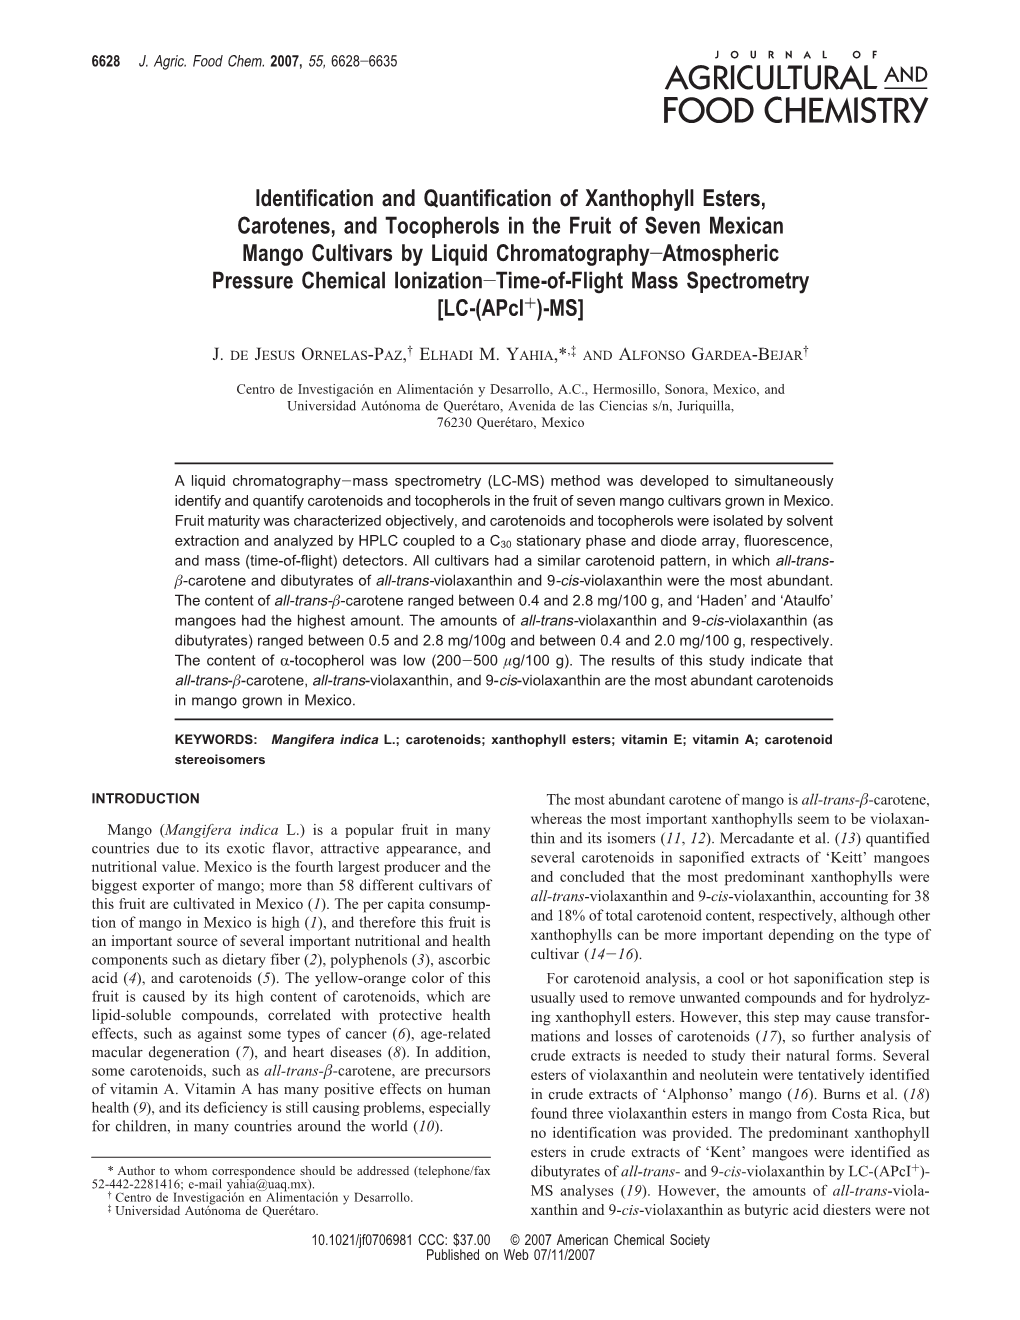 Identification and Quantification of Xanthophyll Esters, Carotenes, And